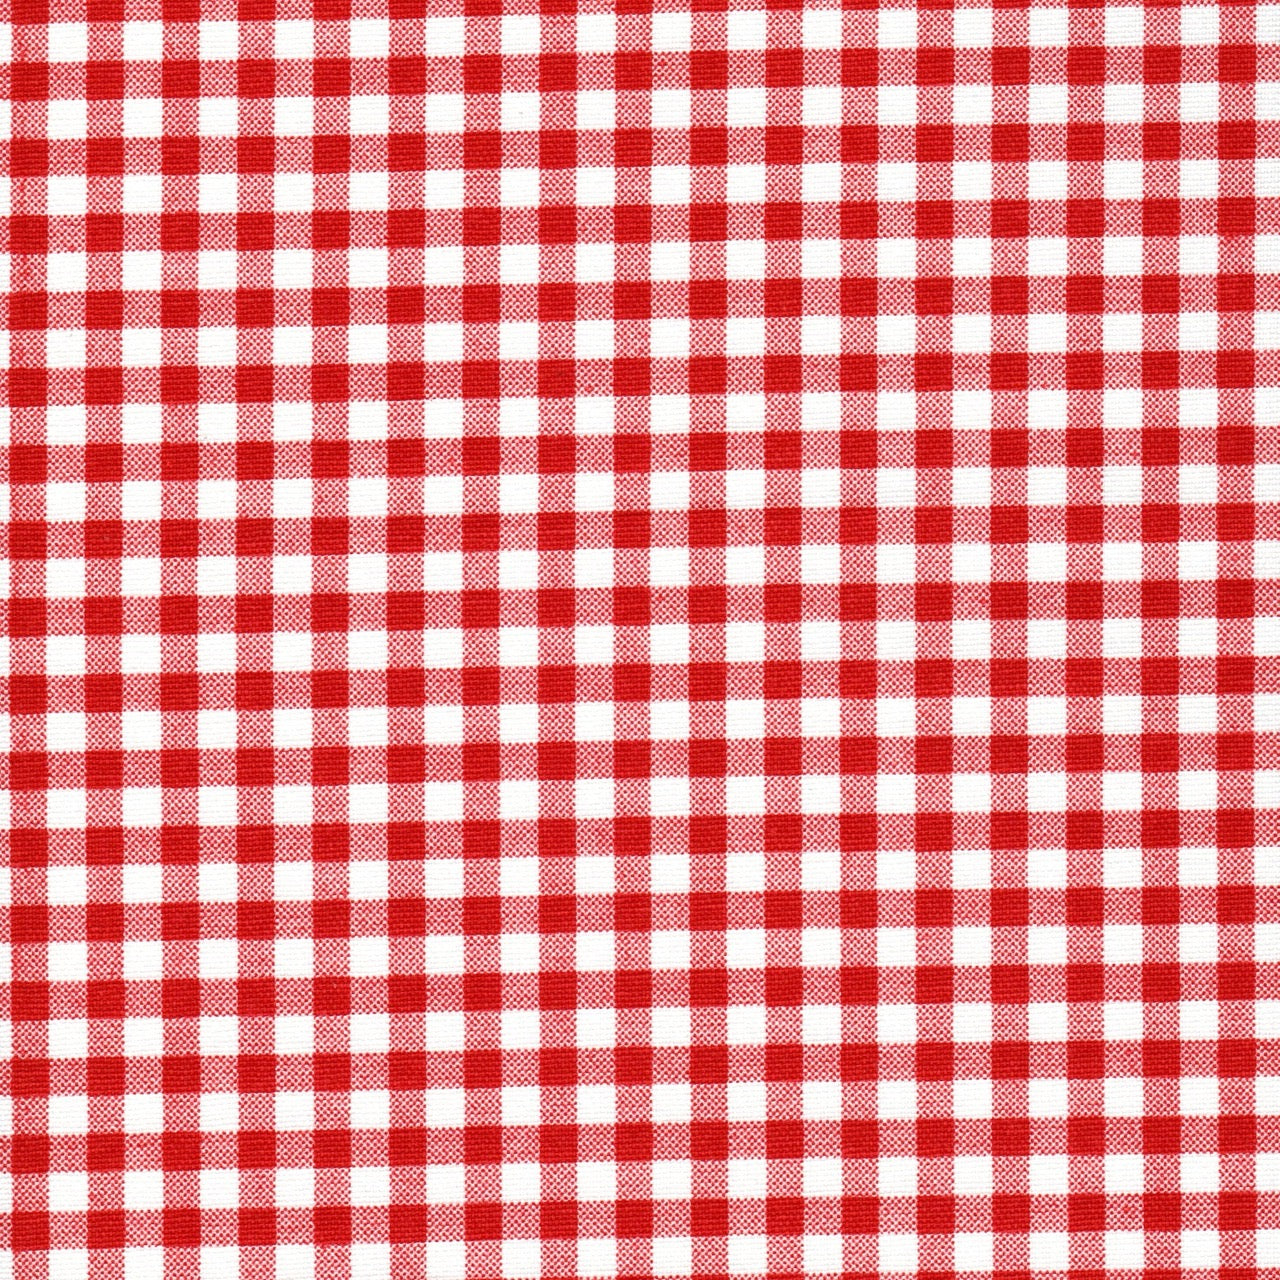 Scalloped Valance in Lipstick Red Large Gingham Check on White